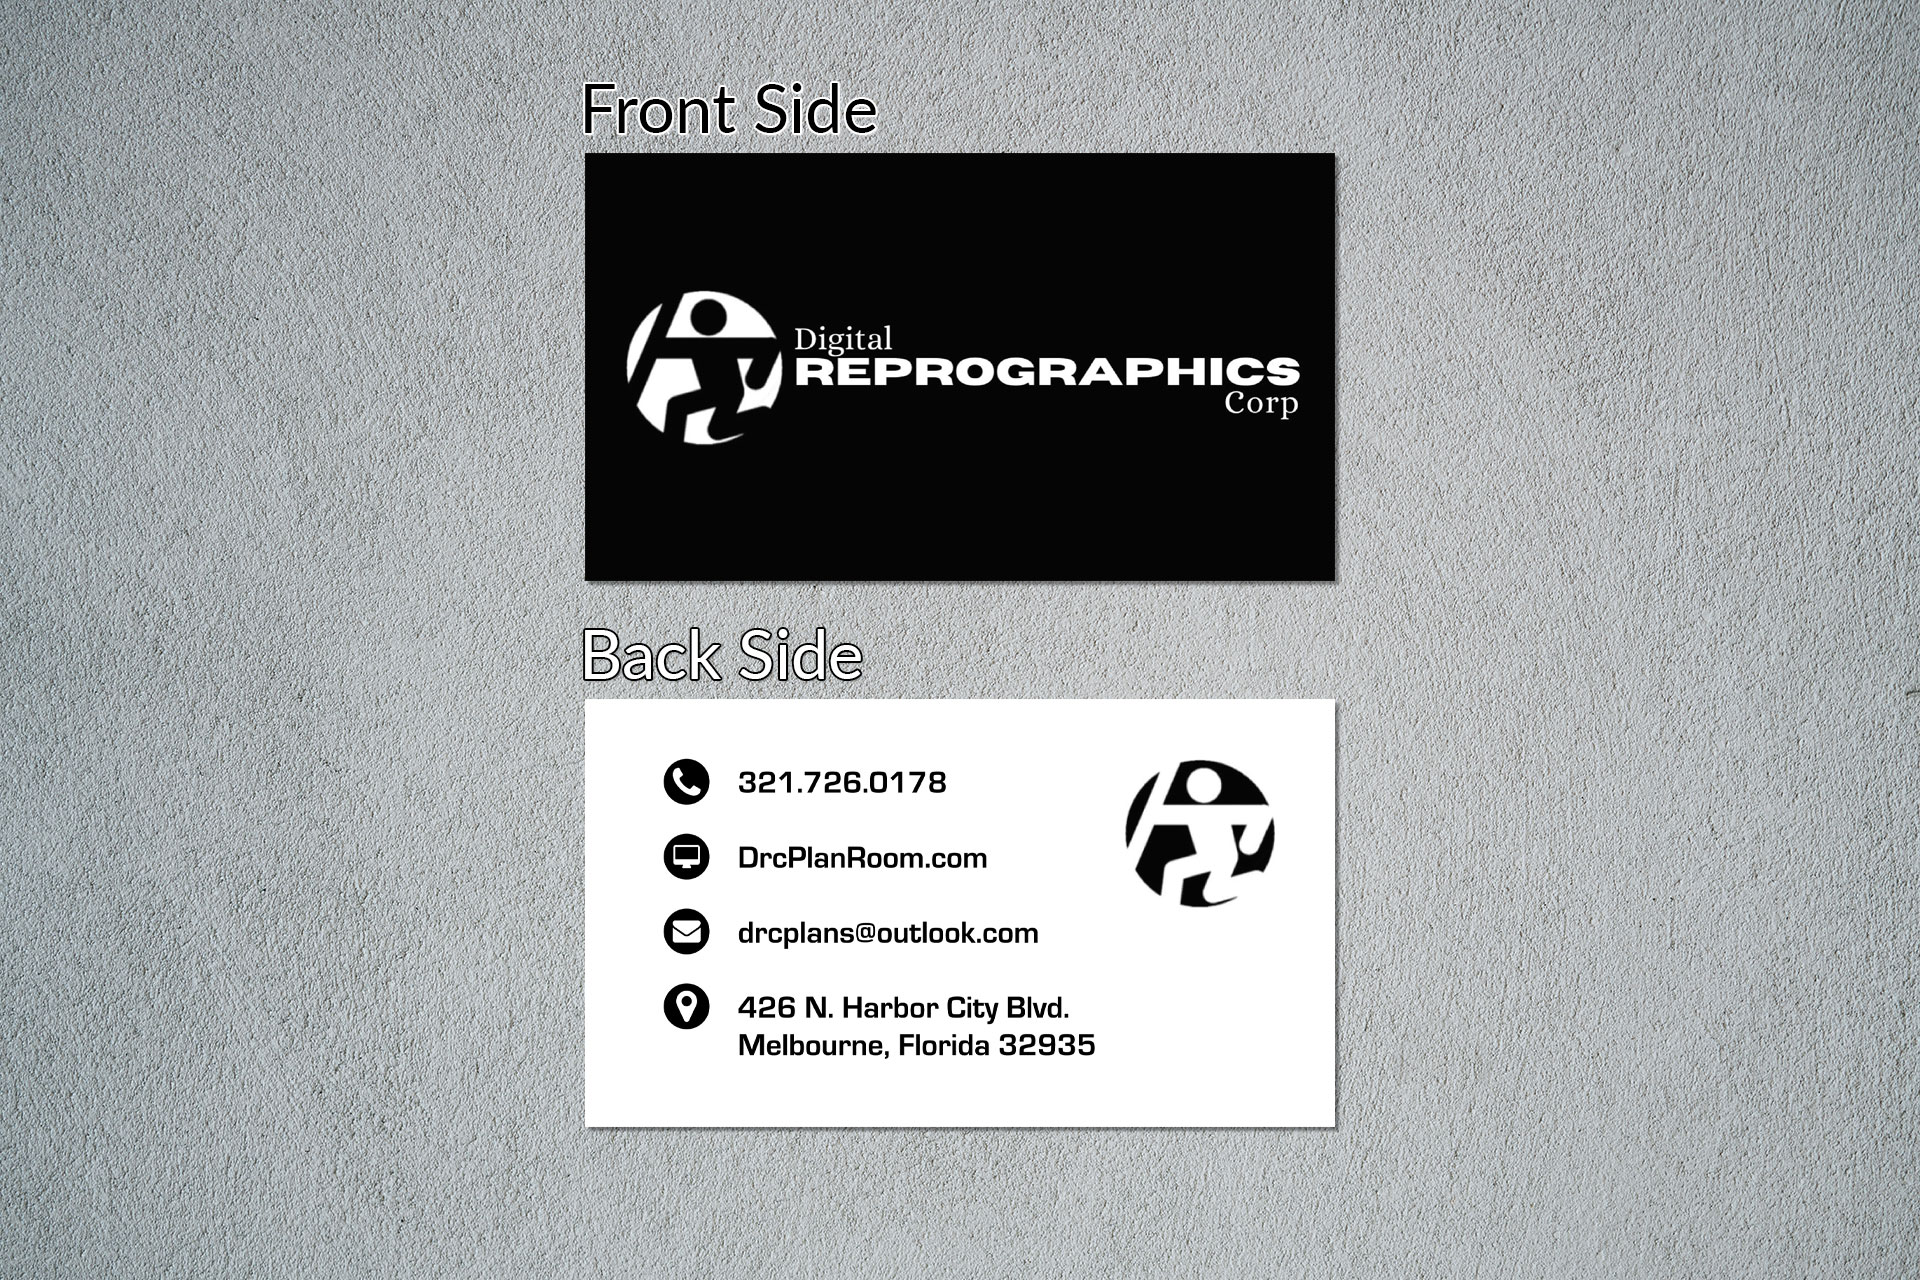 New Business Cards: Digital Reprographics Corp